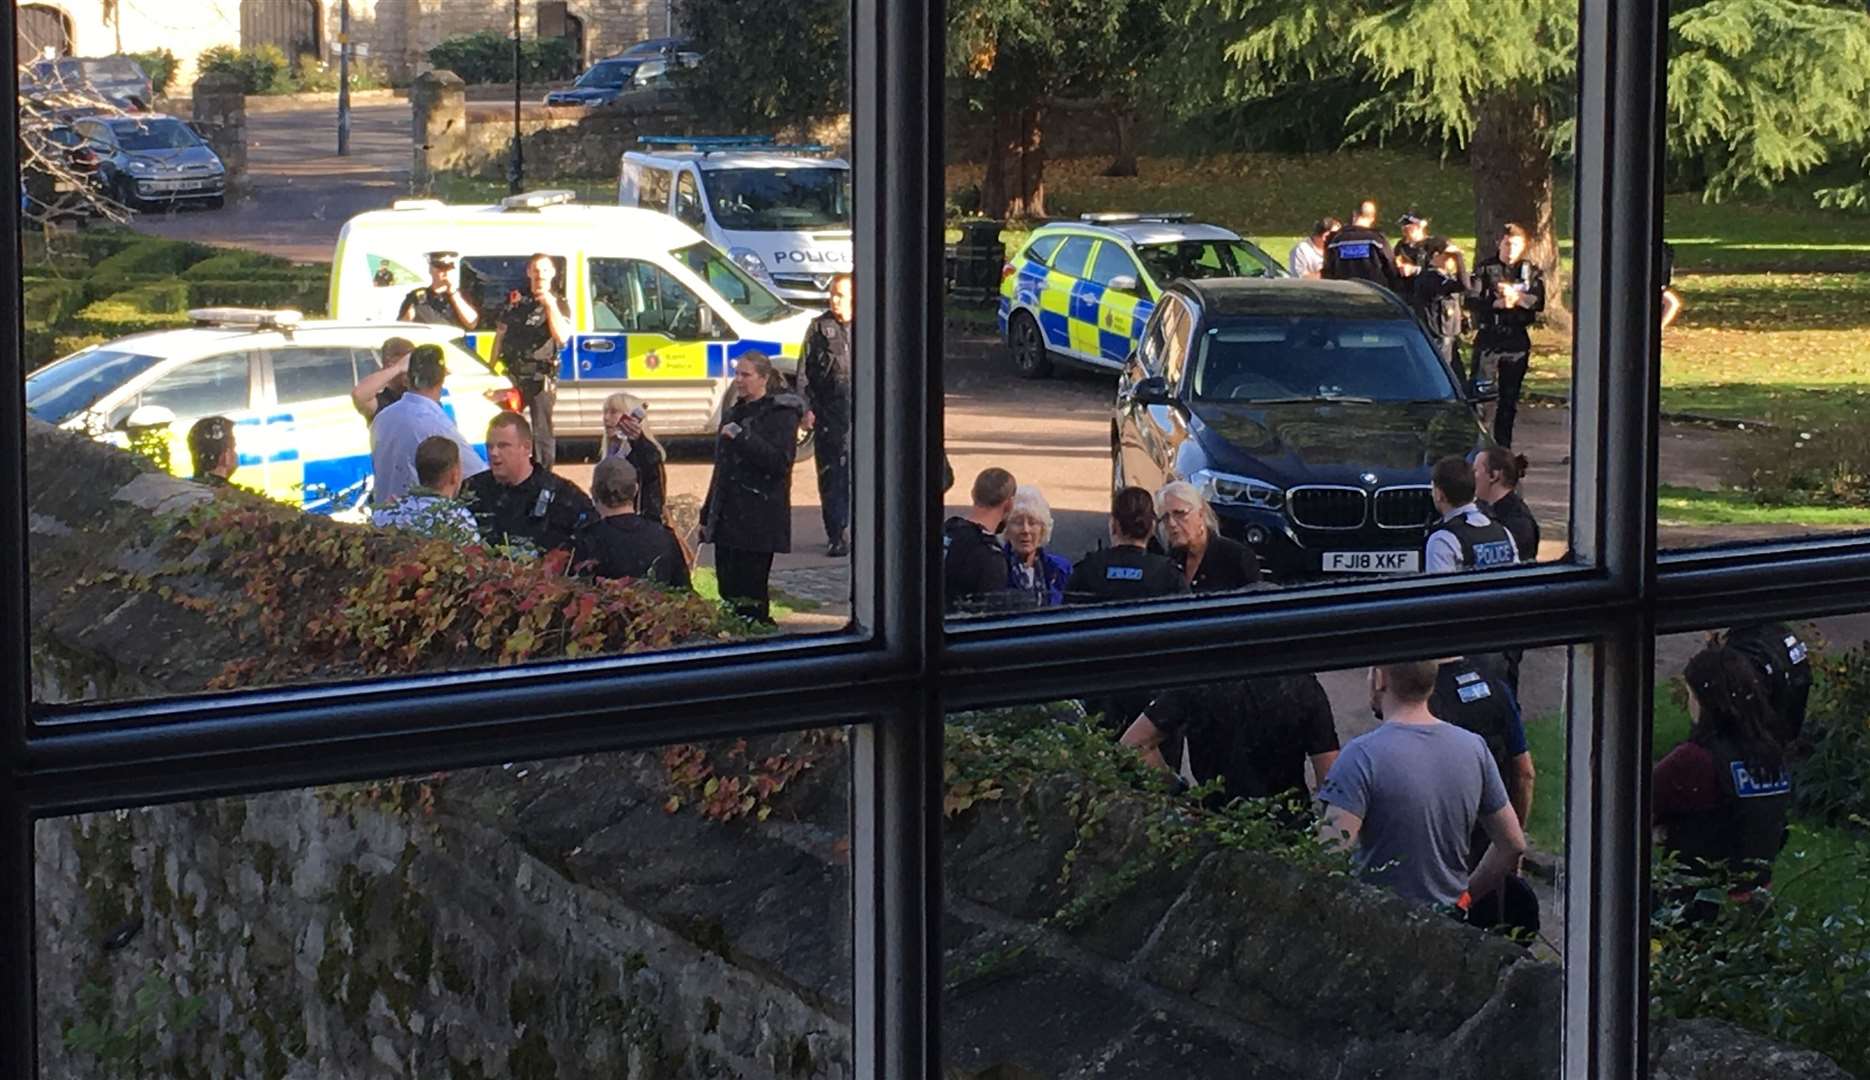 Policed swarmed Archbishop's Palace in Maidstone after the fight